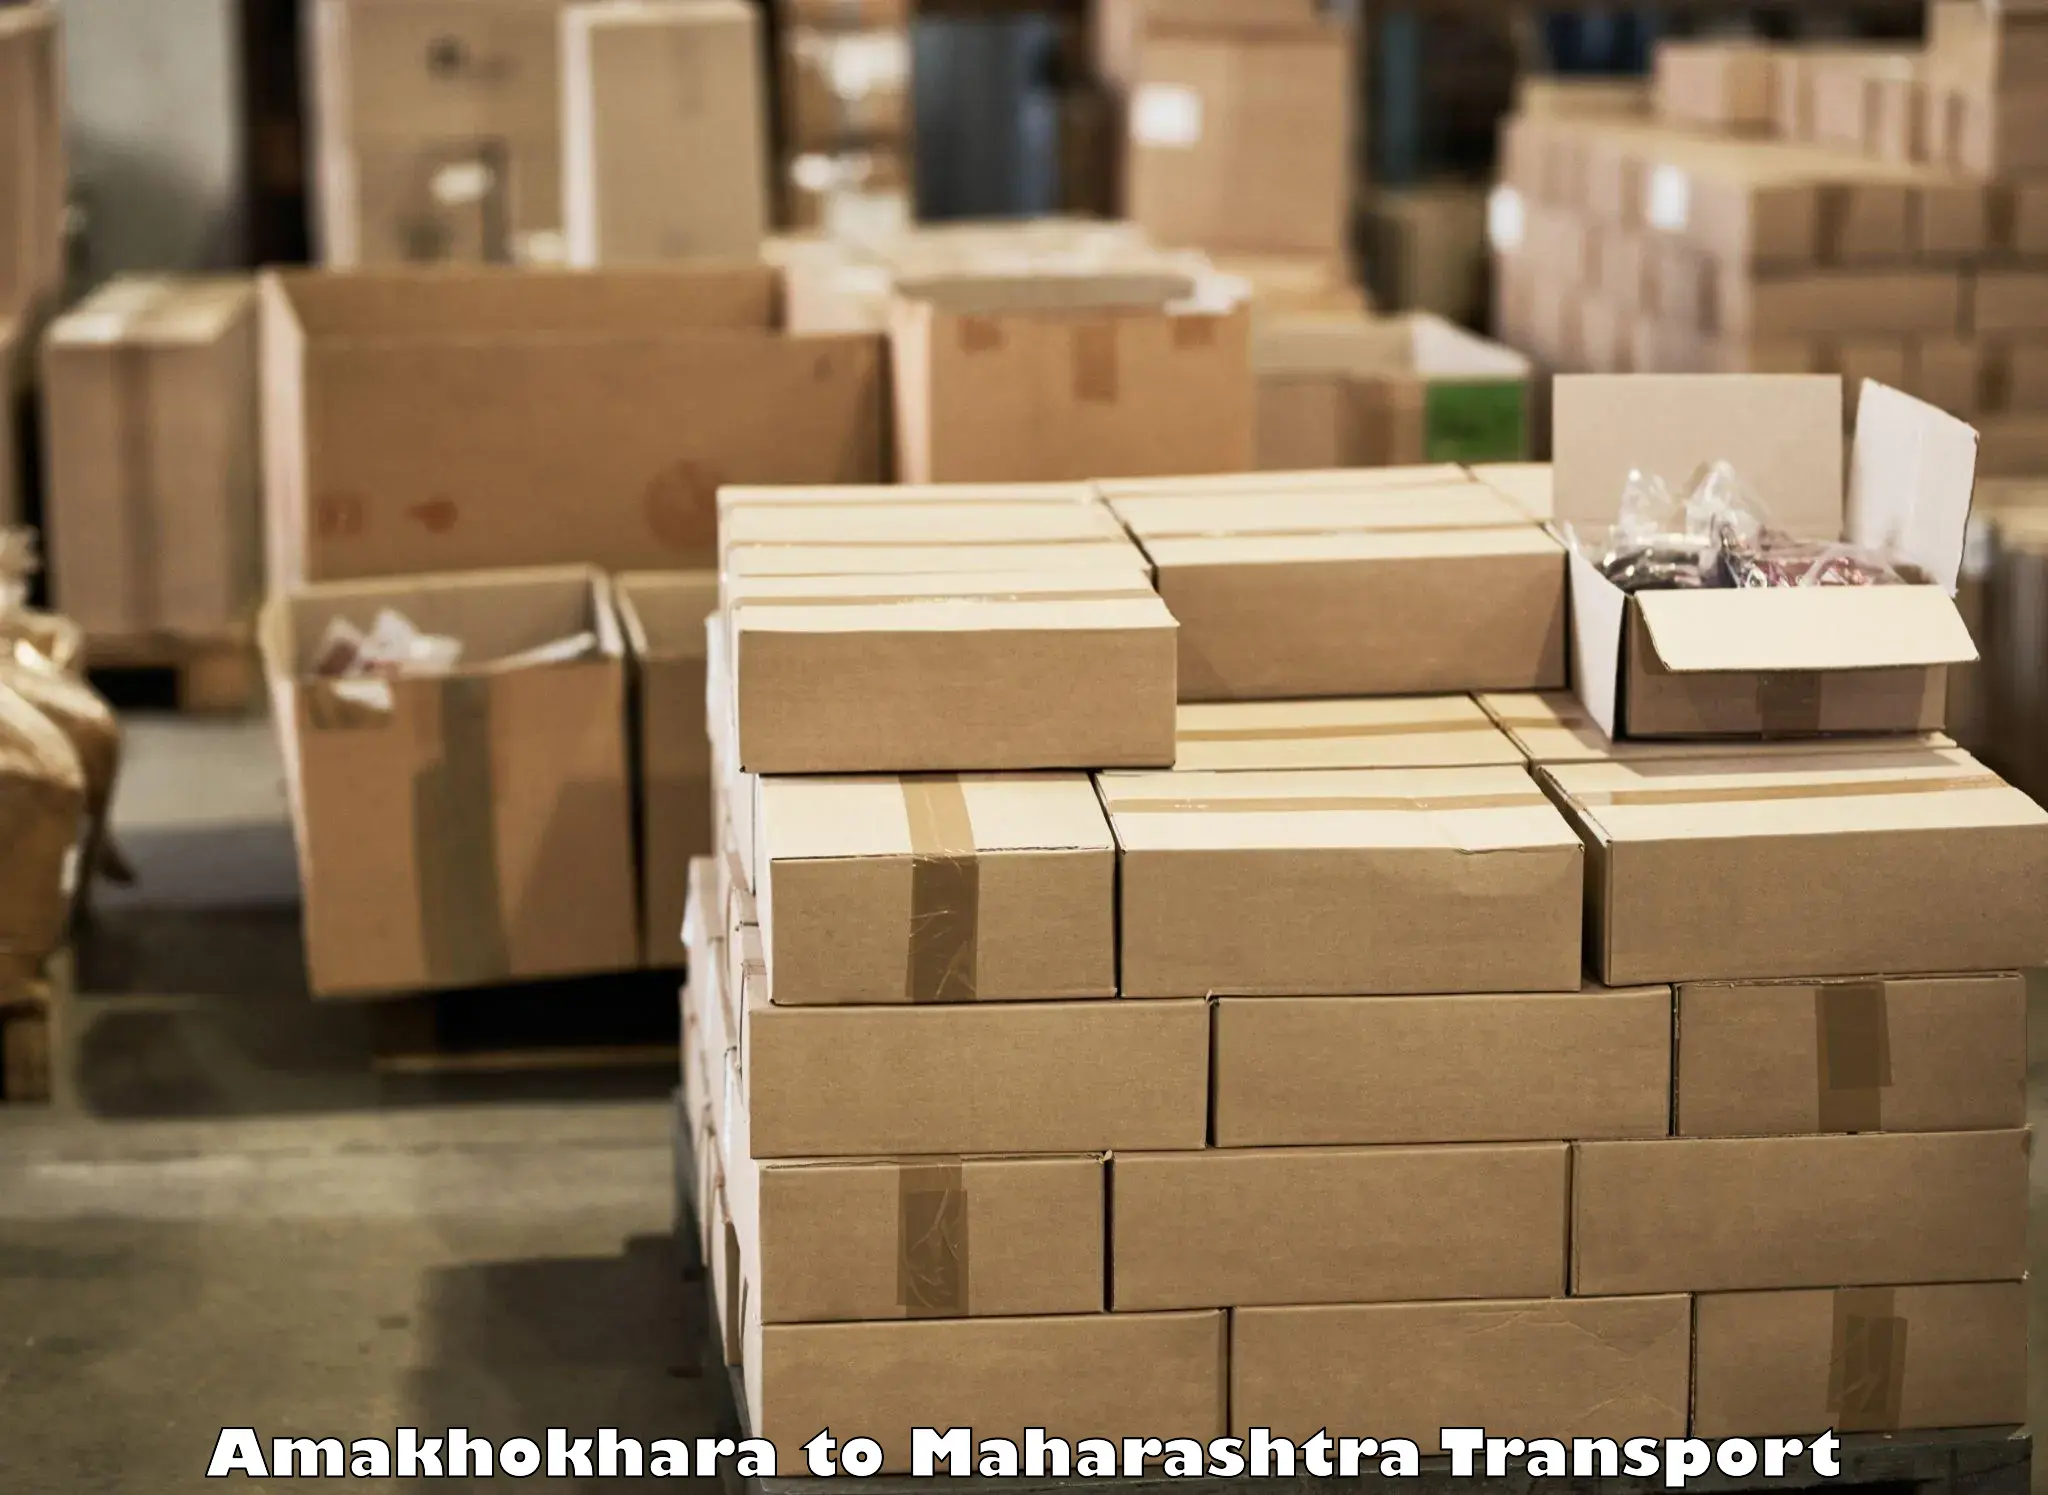 Furniture transport service in Amakhokhara to SVKMs Narsee Monjee Institute of Management Studies Mumbai